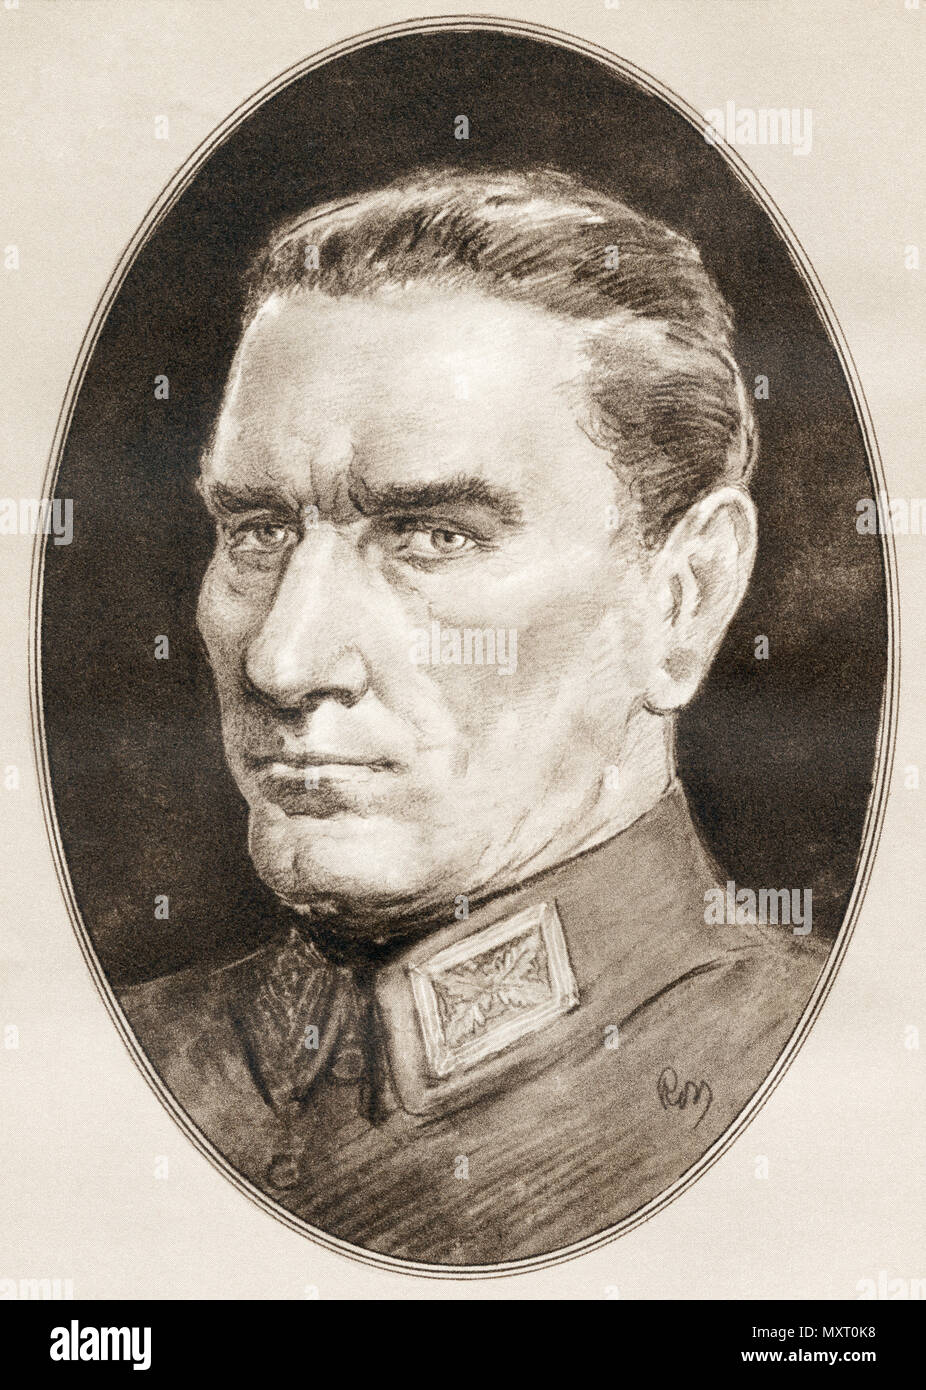 Mustafa Kemal Atatürk, 1881 - 1938. Turkish army officer, revolutionary, founder of the Republic of Turkey, and its first President.   Illustration by Gordon Ross, American artist and illustrator (1873-1946), from Living Biographies of Famous Men. Stock Photo